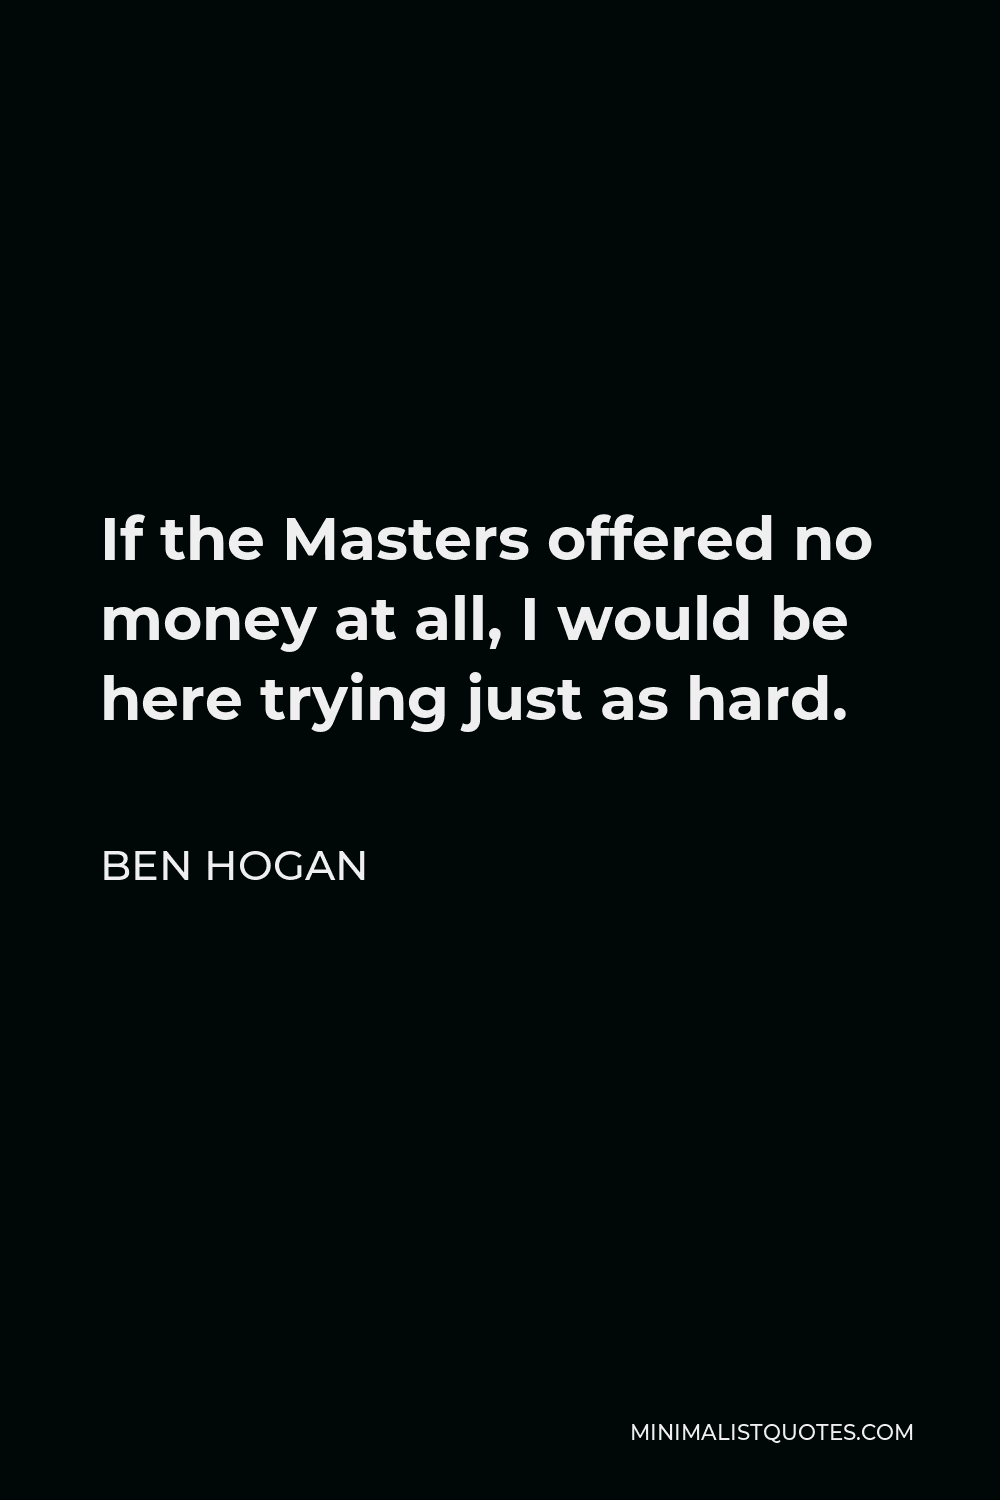 Ben Hogan Quote - If the Masters offered no money at all, I would be here trying just as hard.